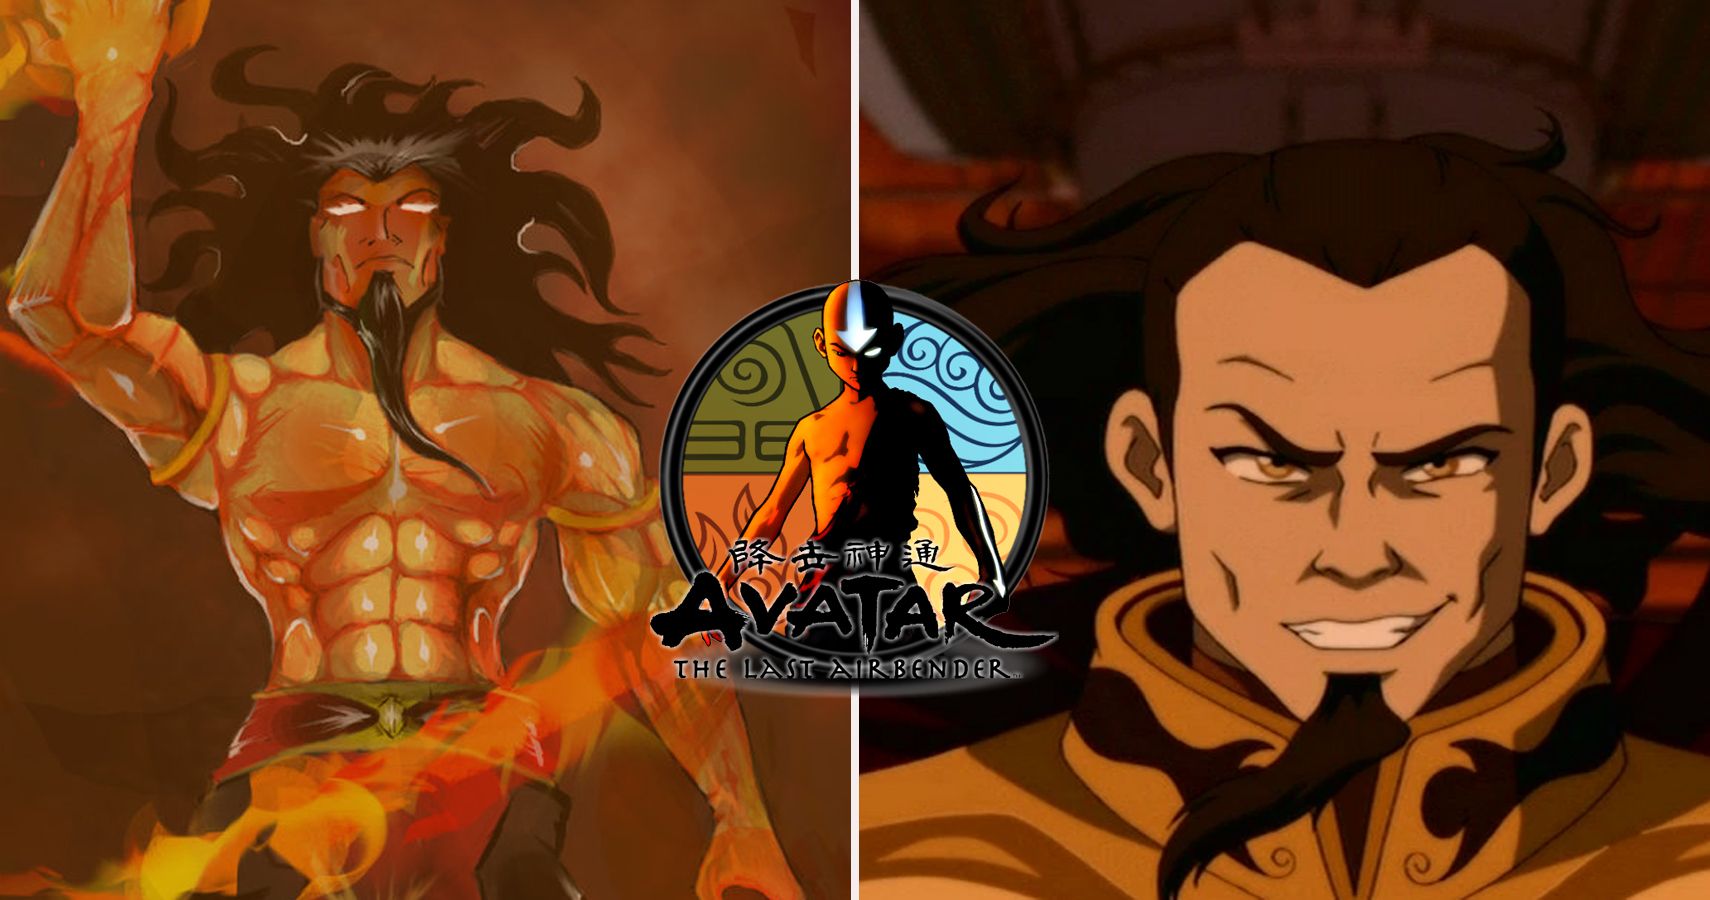 Avatar: The Last Airbender': First-look at Fire Lord Ozai, General Iroh,  Azula - Los Angeles Times